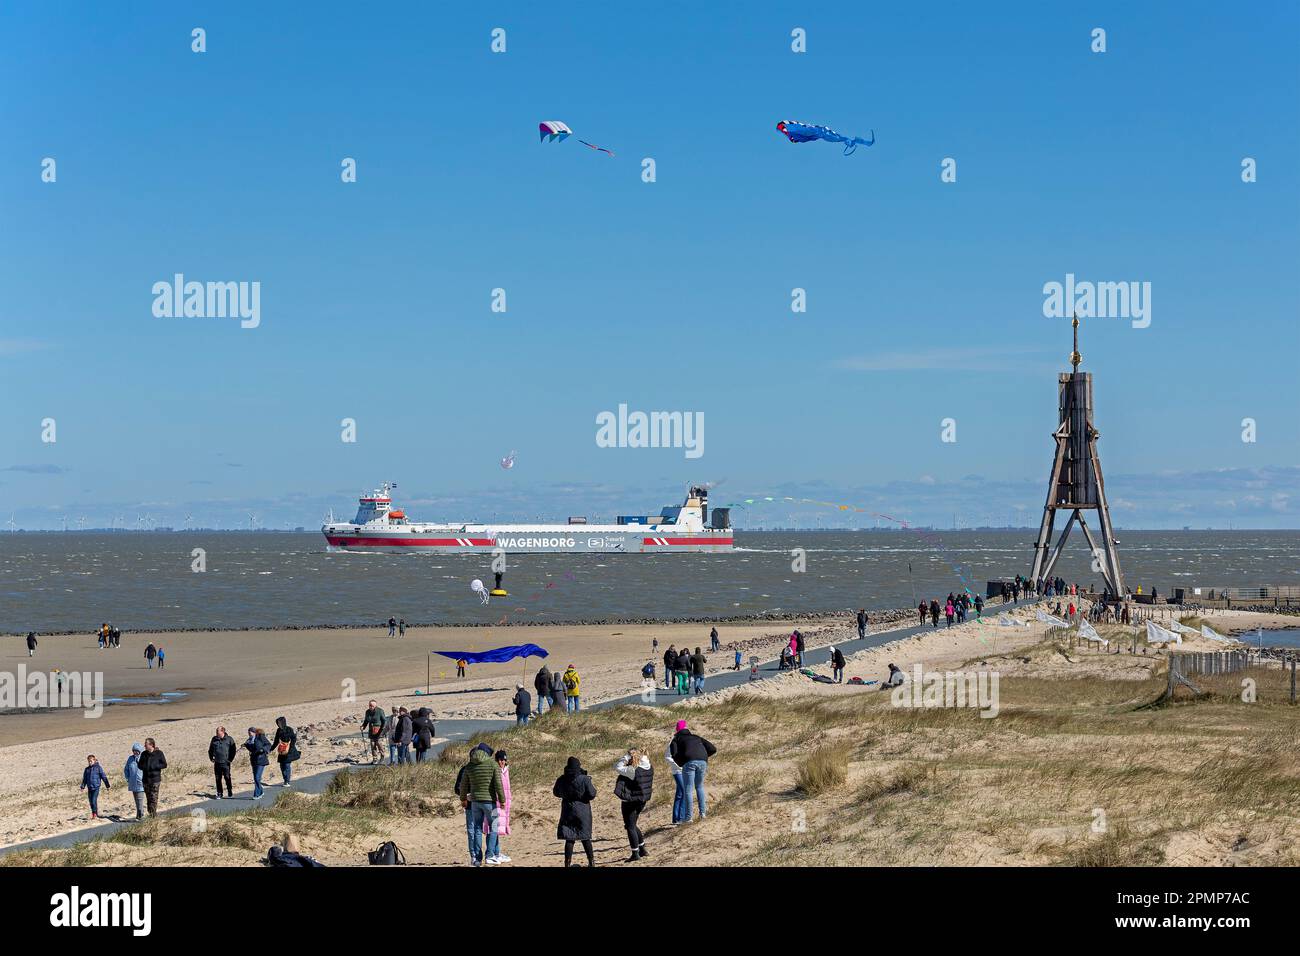 People, flying kites, freight ship, sea marker Kugelbake, North Sea, Elbe, Cuxhaven, Lower-Saxony, Germany Stock Photo